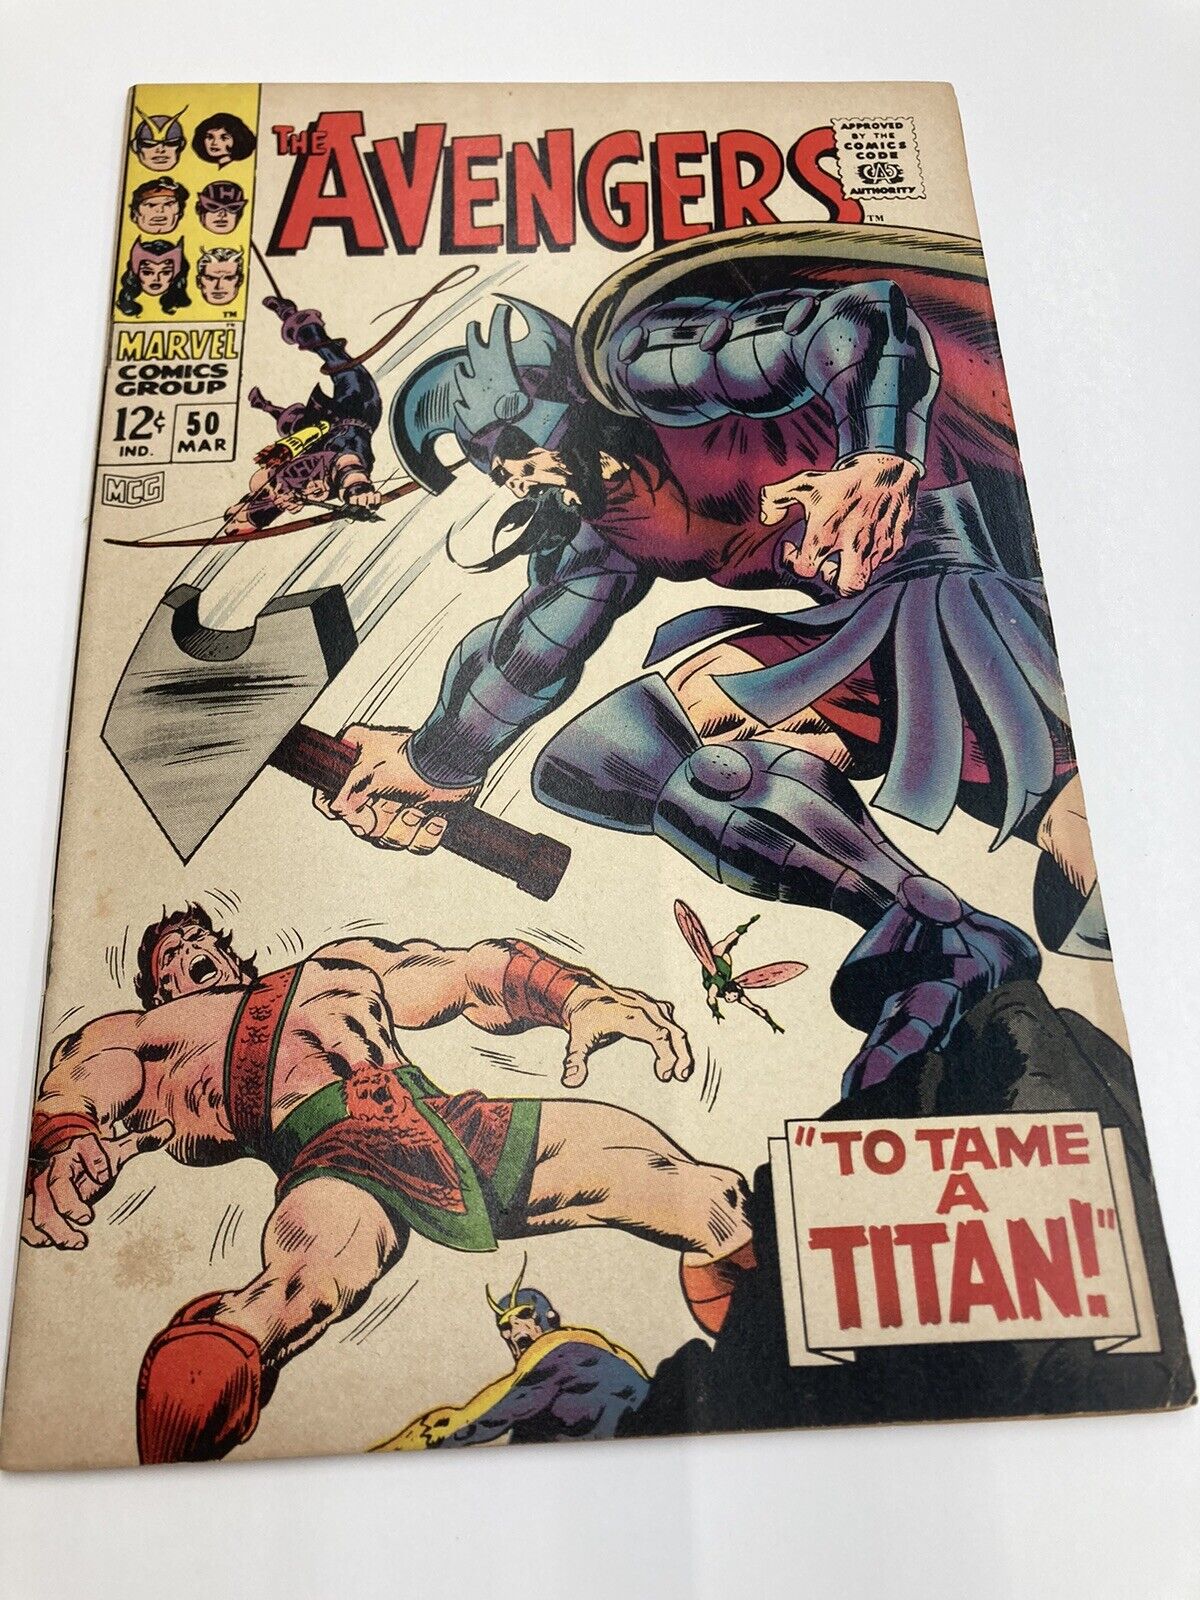 RARE MARCH 1968 MARVEL THE AVENGERS VOL. 1  NO. 50   TO TAME A TITAN